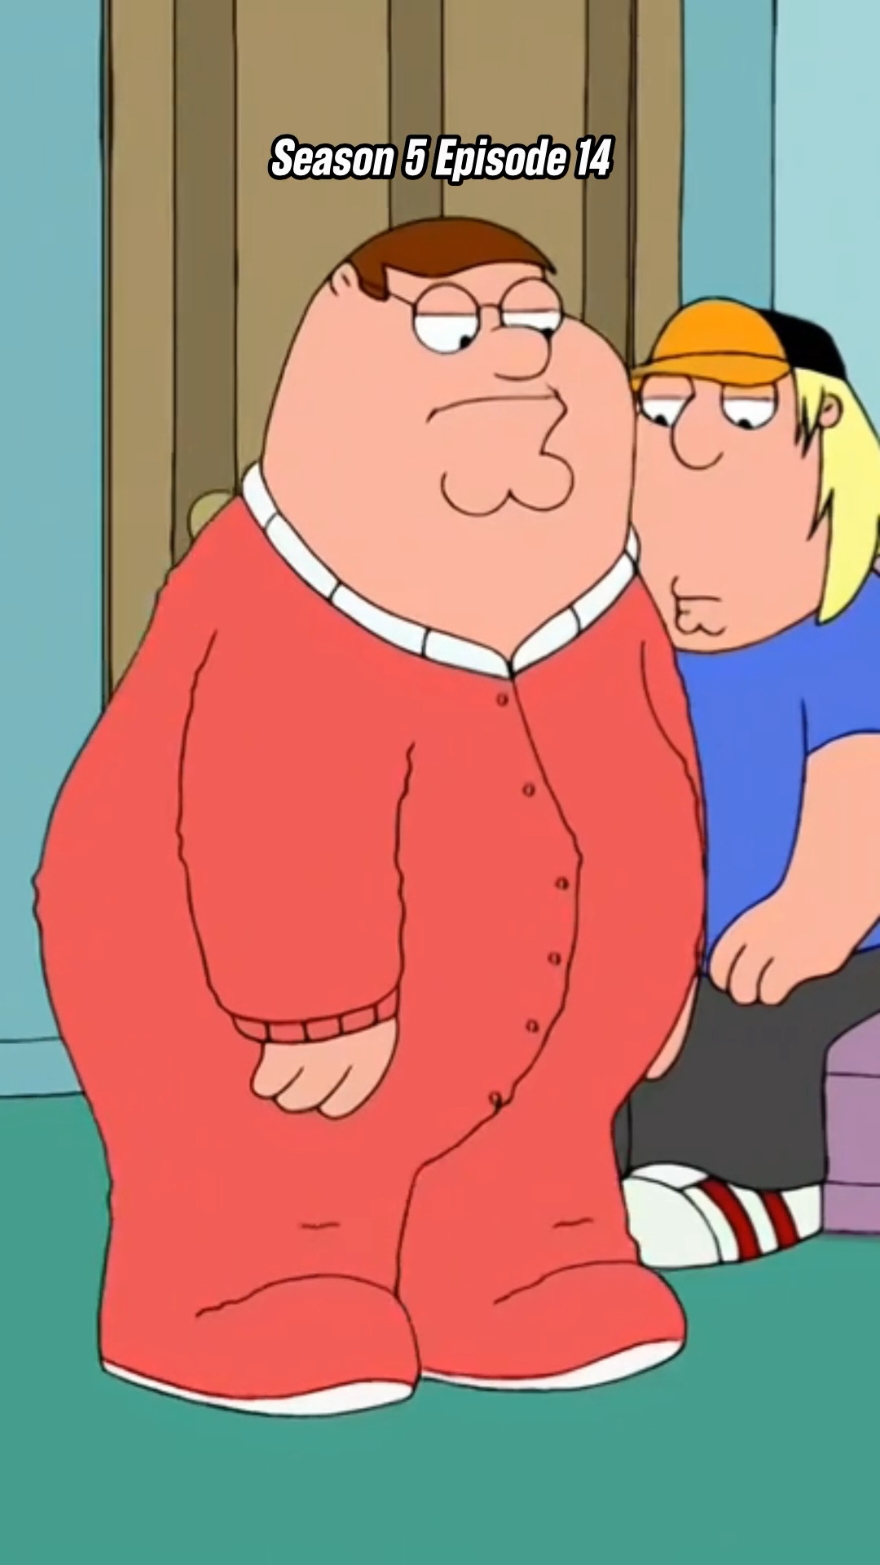 Peter is Jesus 😂 #shorts #familyguy #petergriffin #briangriffin #chrisgriffin 